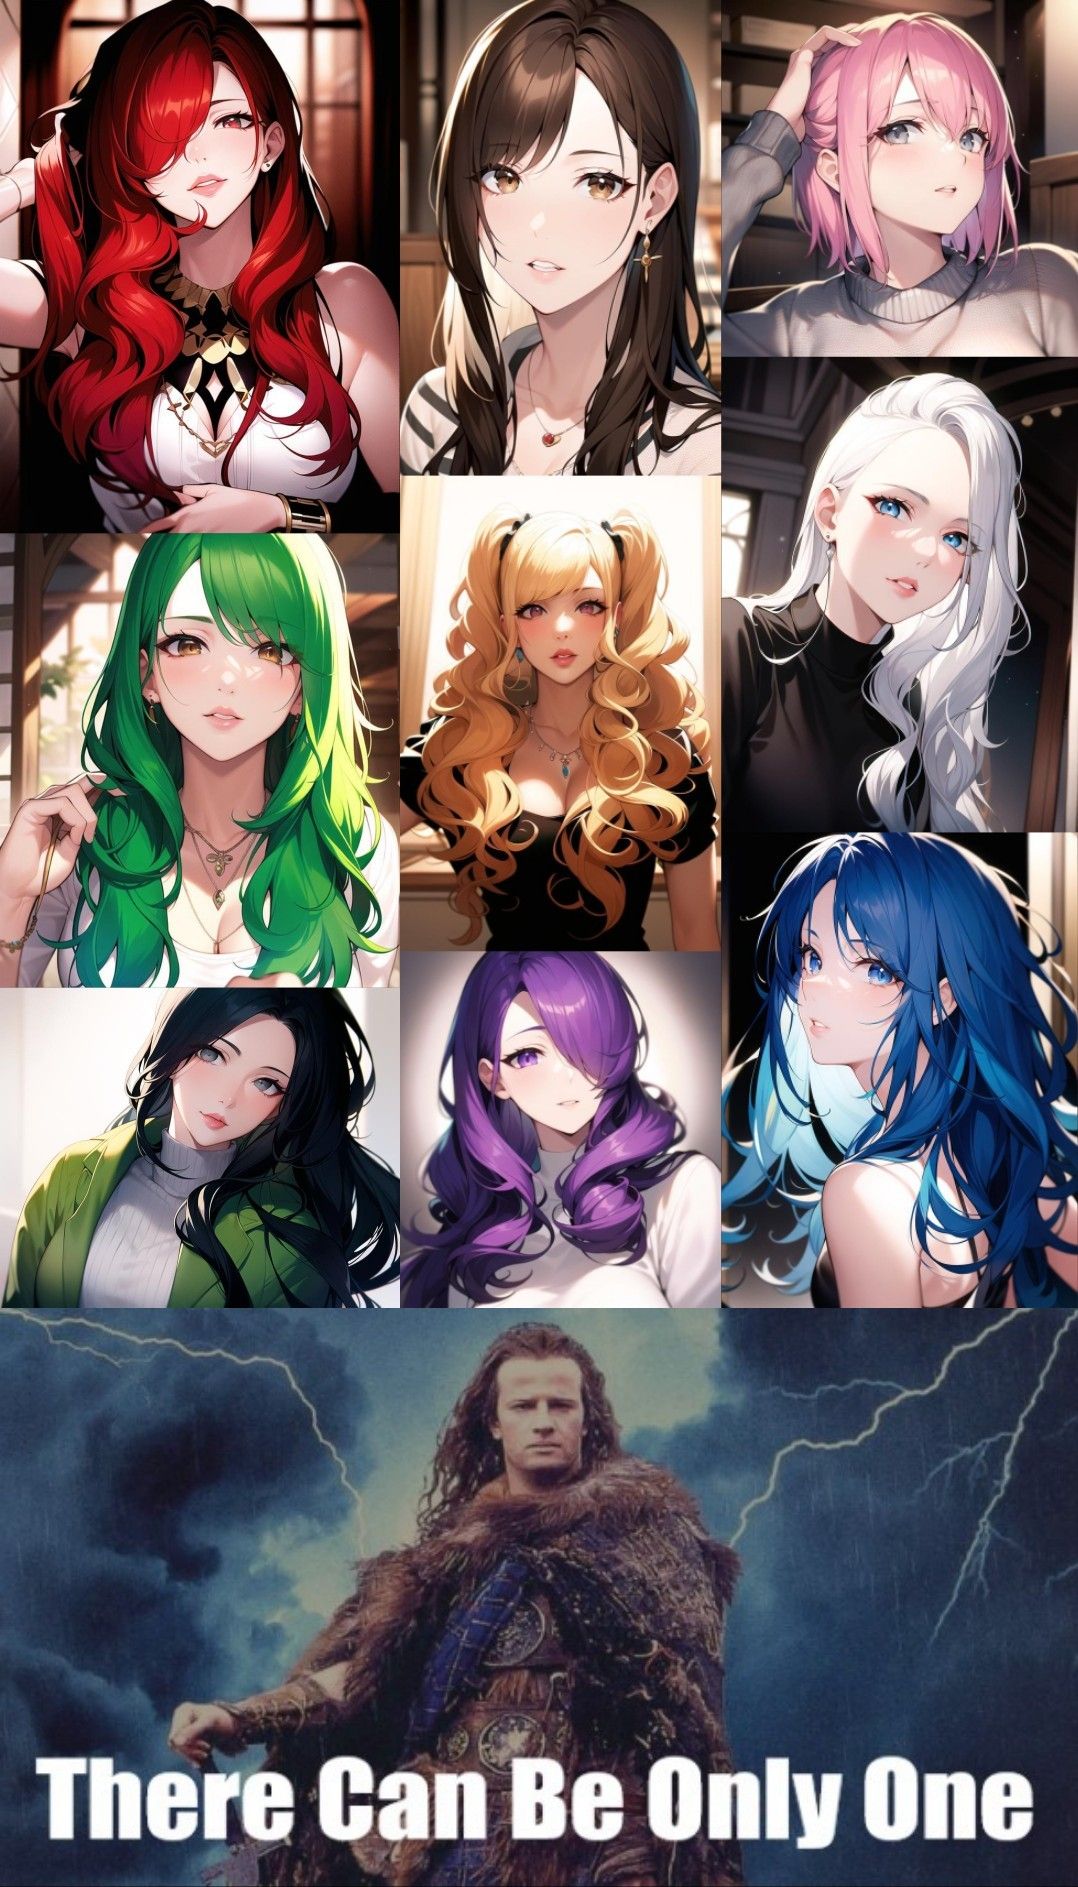 Which is the best hair colour on an anime character?